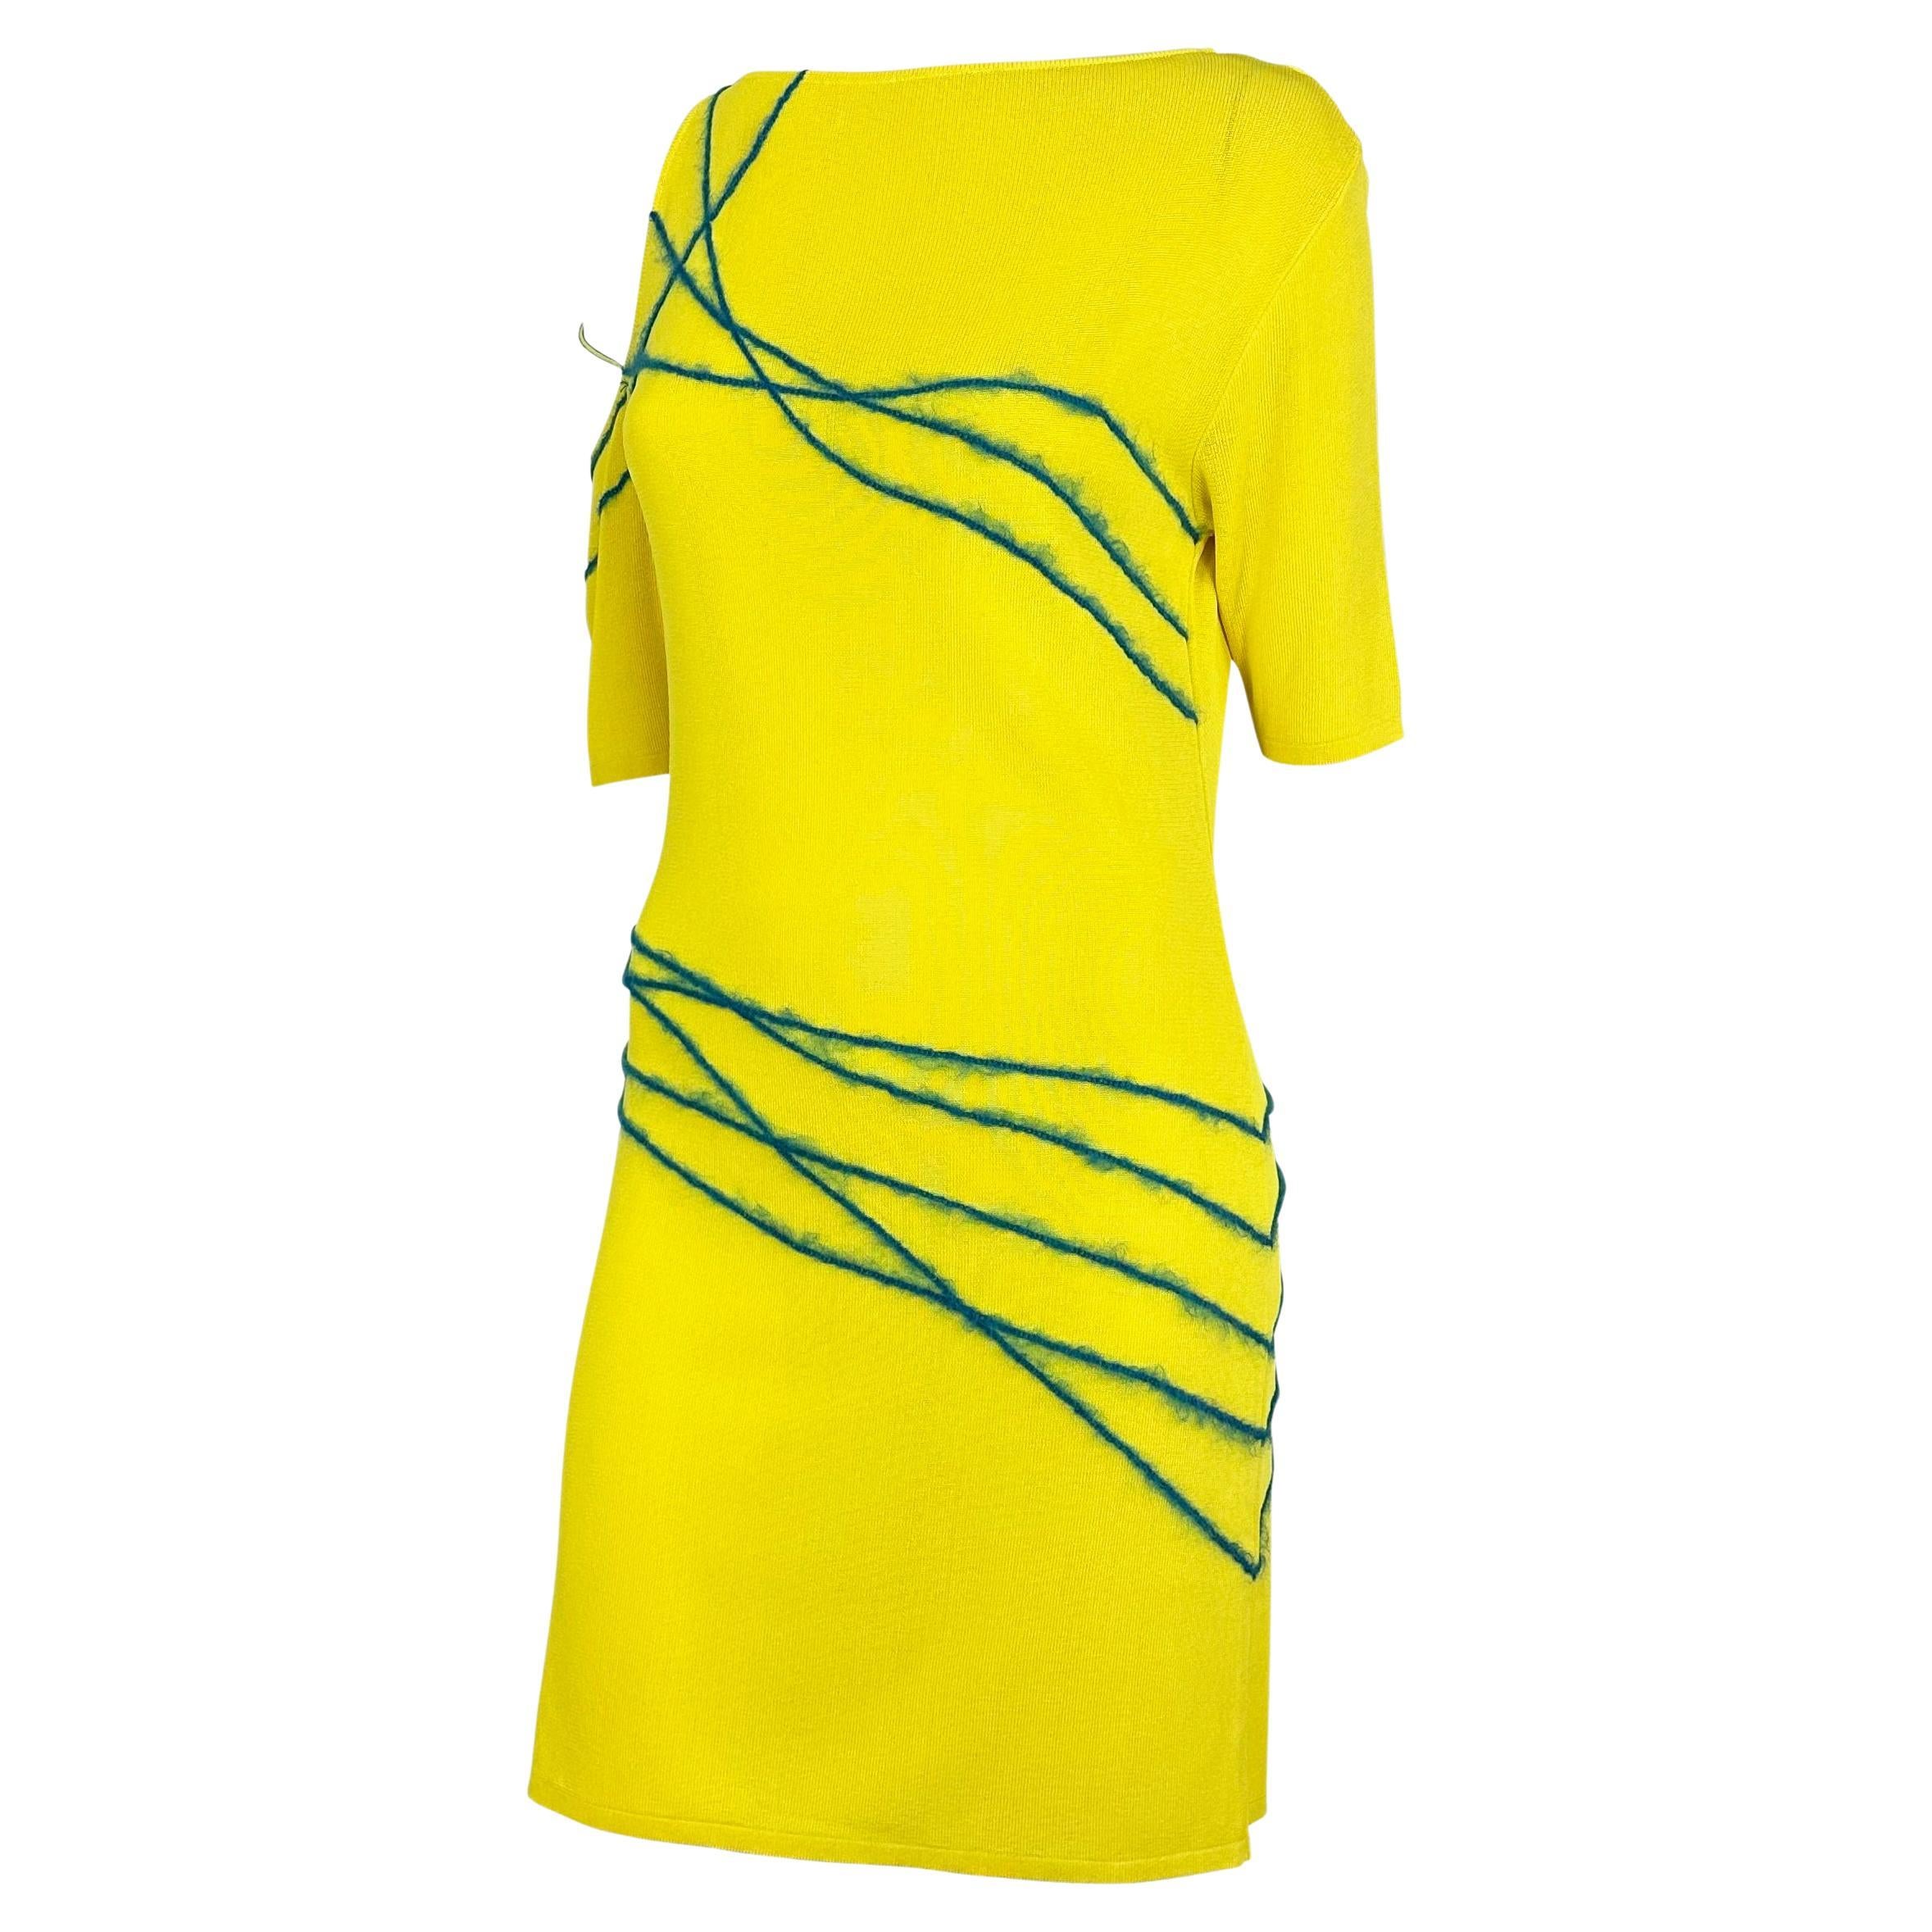 Presenting a fabulous yellow knit Gianni Versace dress designed by Donatella Versace. From the Spring/Summer 1998 collection, similar knit dresses debuted on the season's runway. This vibrant yellow dress features an exposed shoulder, half-length